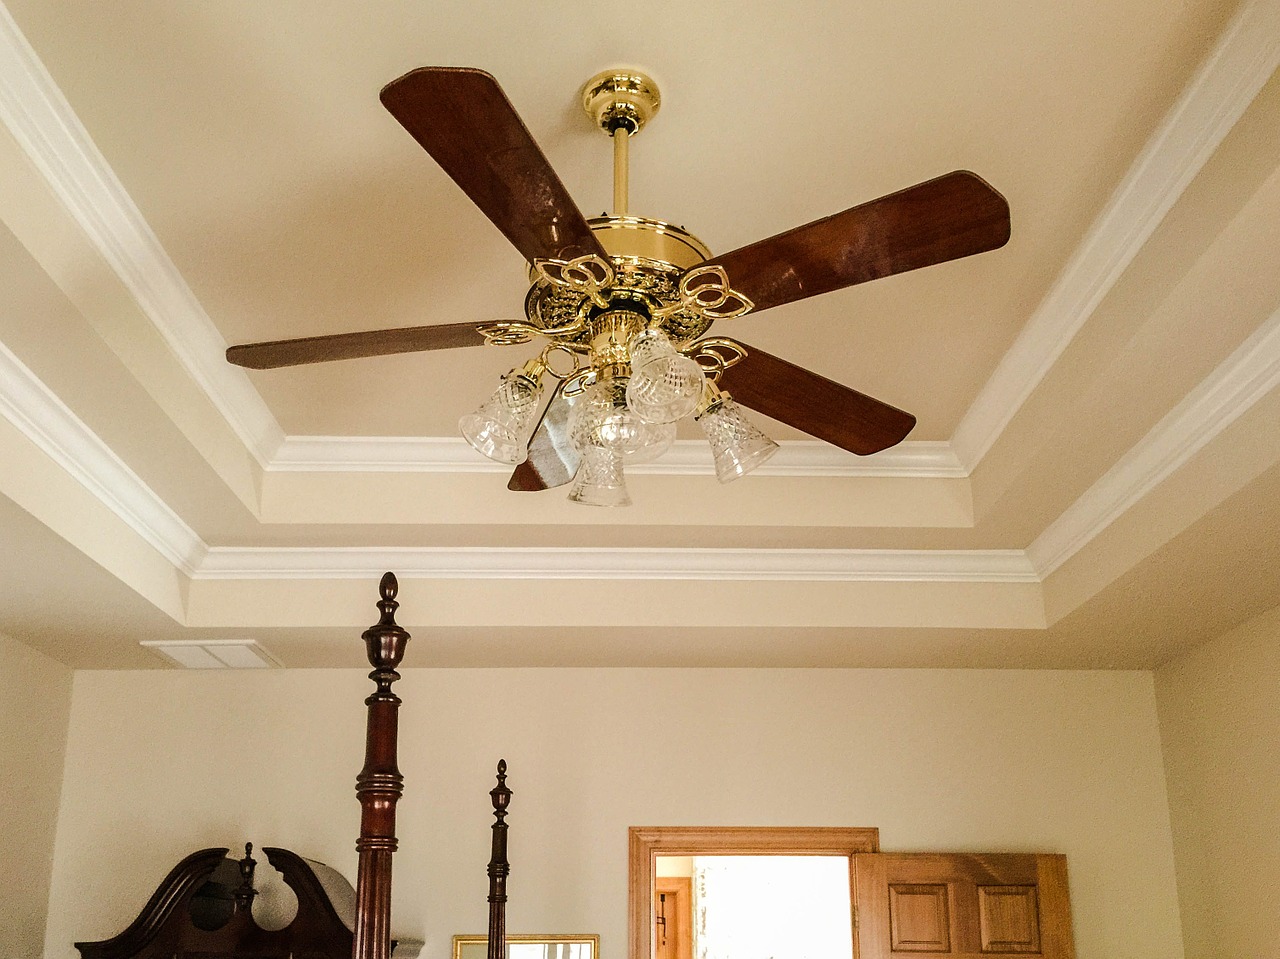 Add elegant crown molding for home improvement on a budget